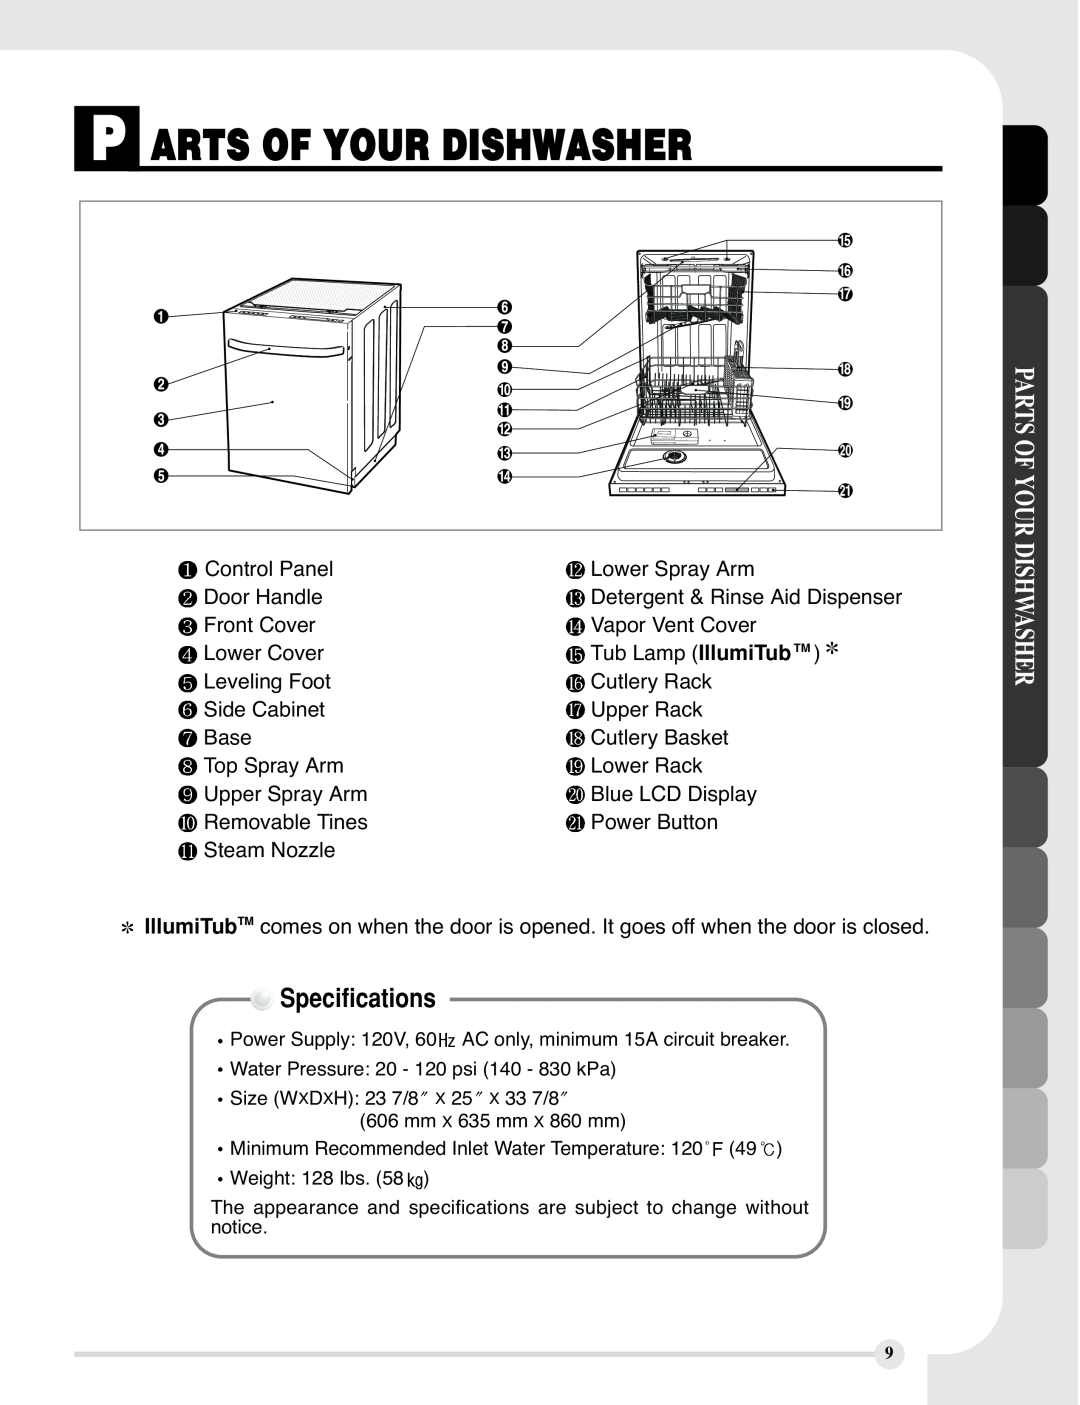 LG Electronics LDF9810BB, LDF9810WW manual P Arts Of Your Dishwasher, Specifications, Parts Of Your Dishwasher 